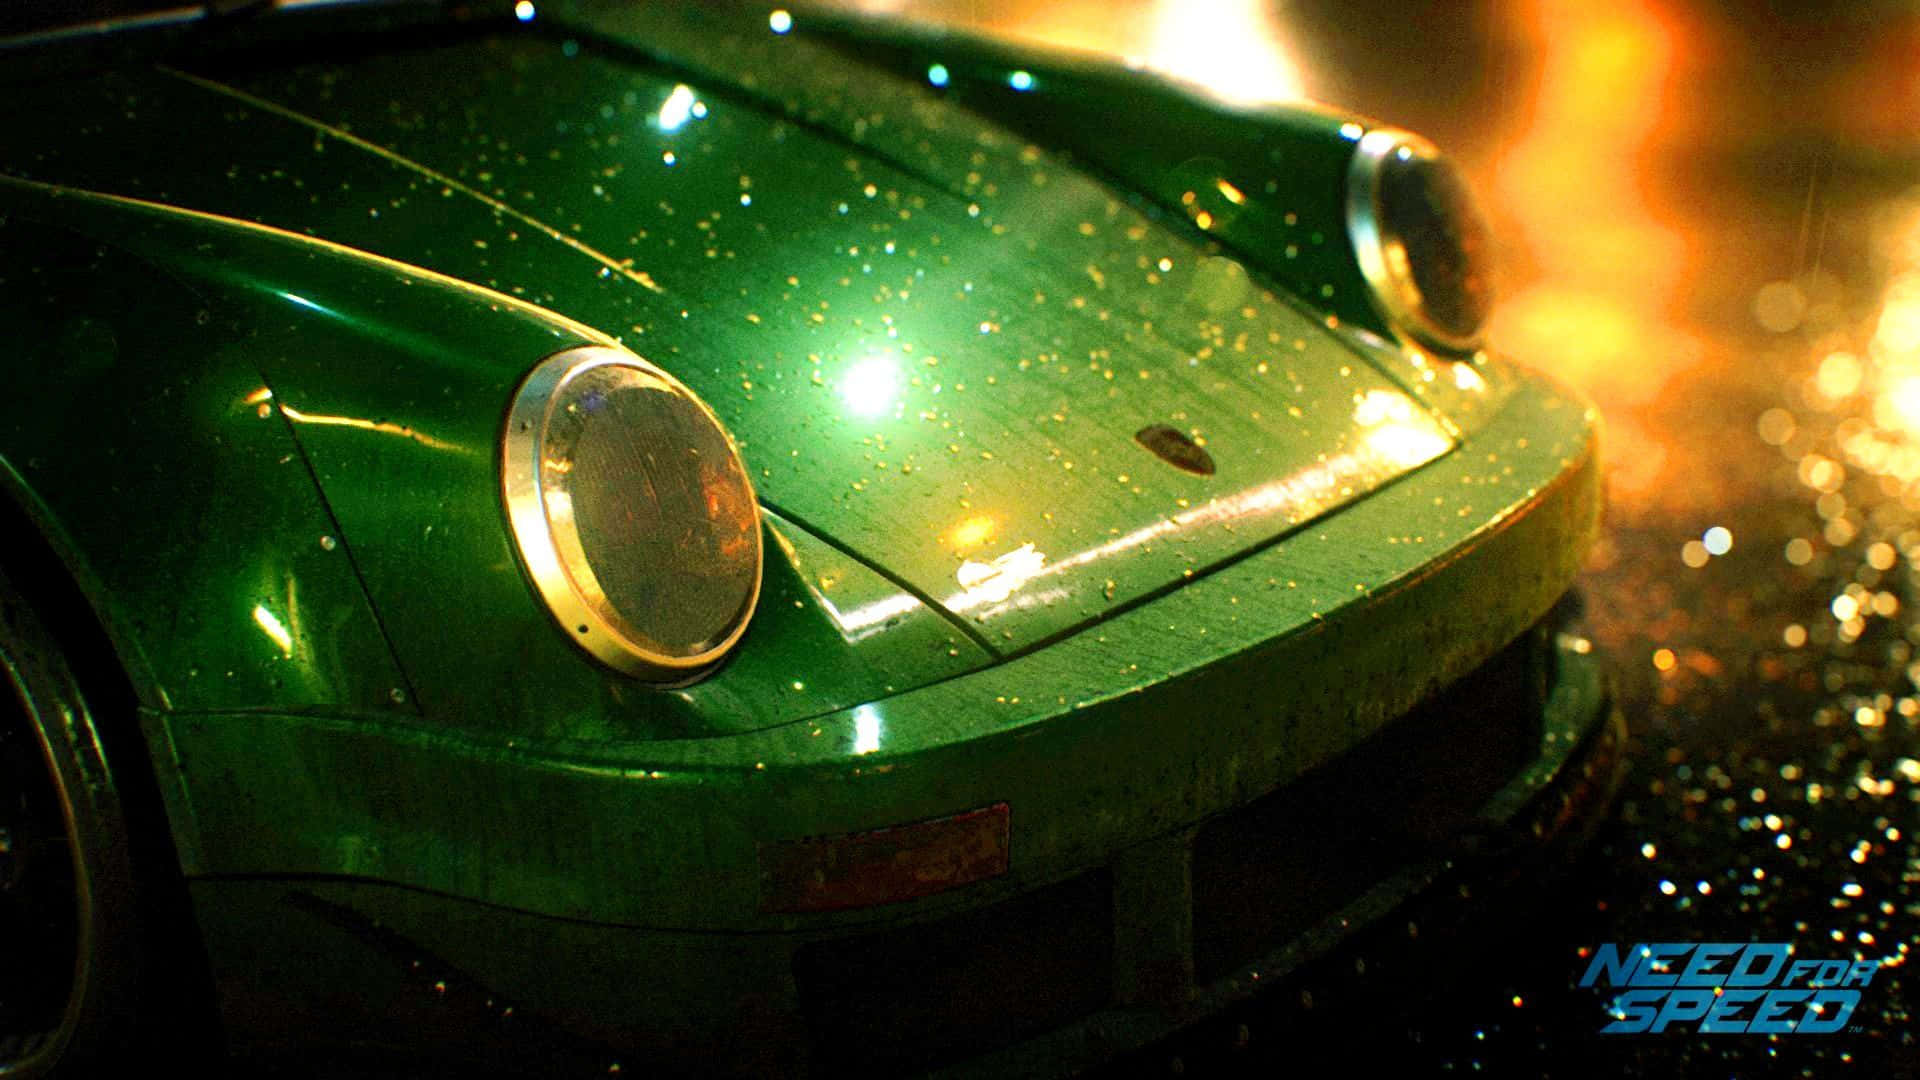 Green Car Need For Speed Laptop Wallpaper